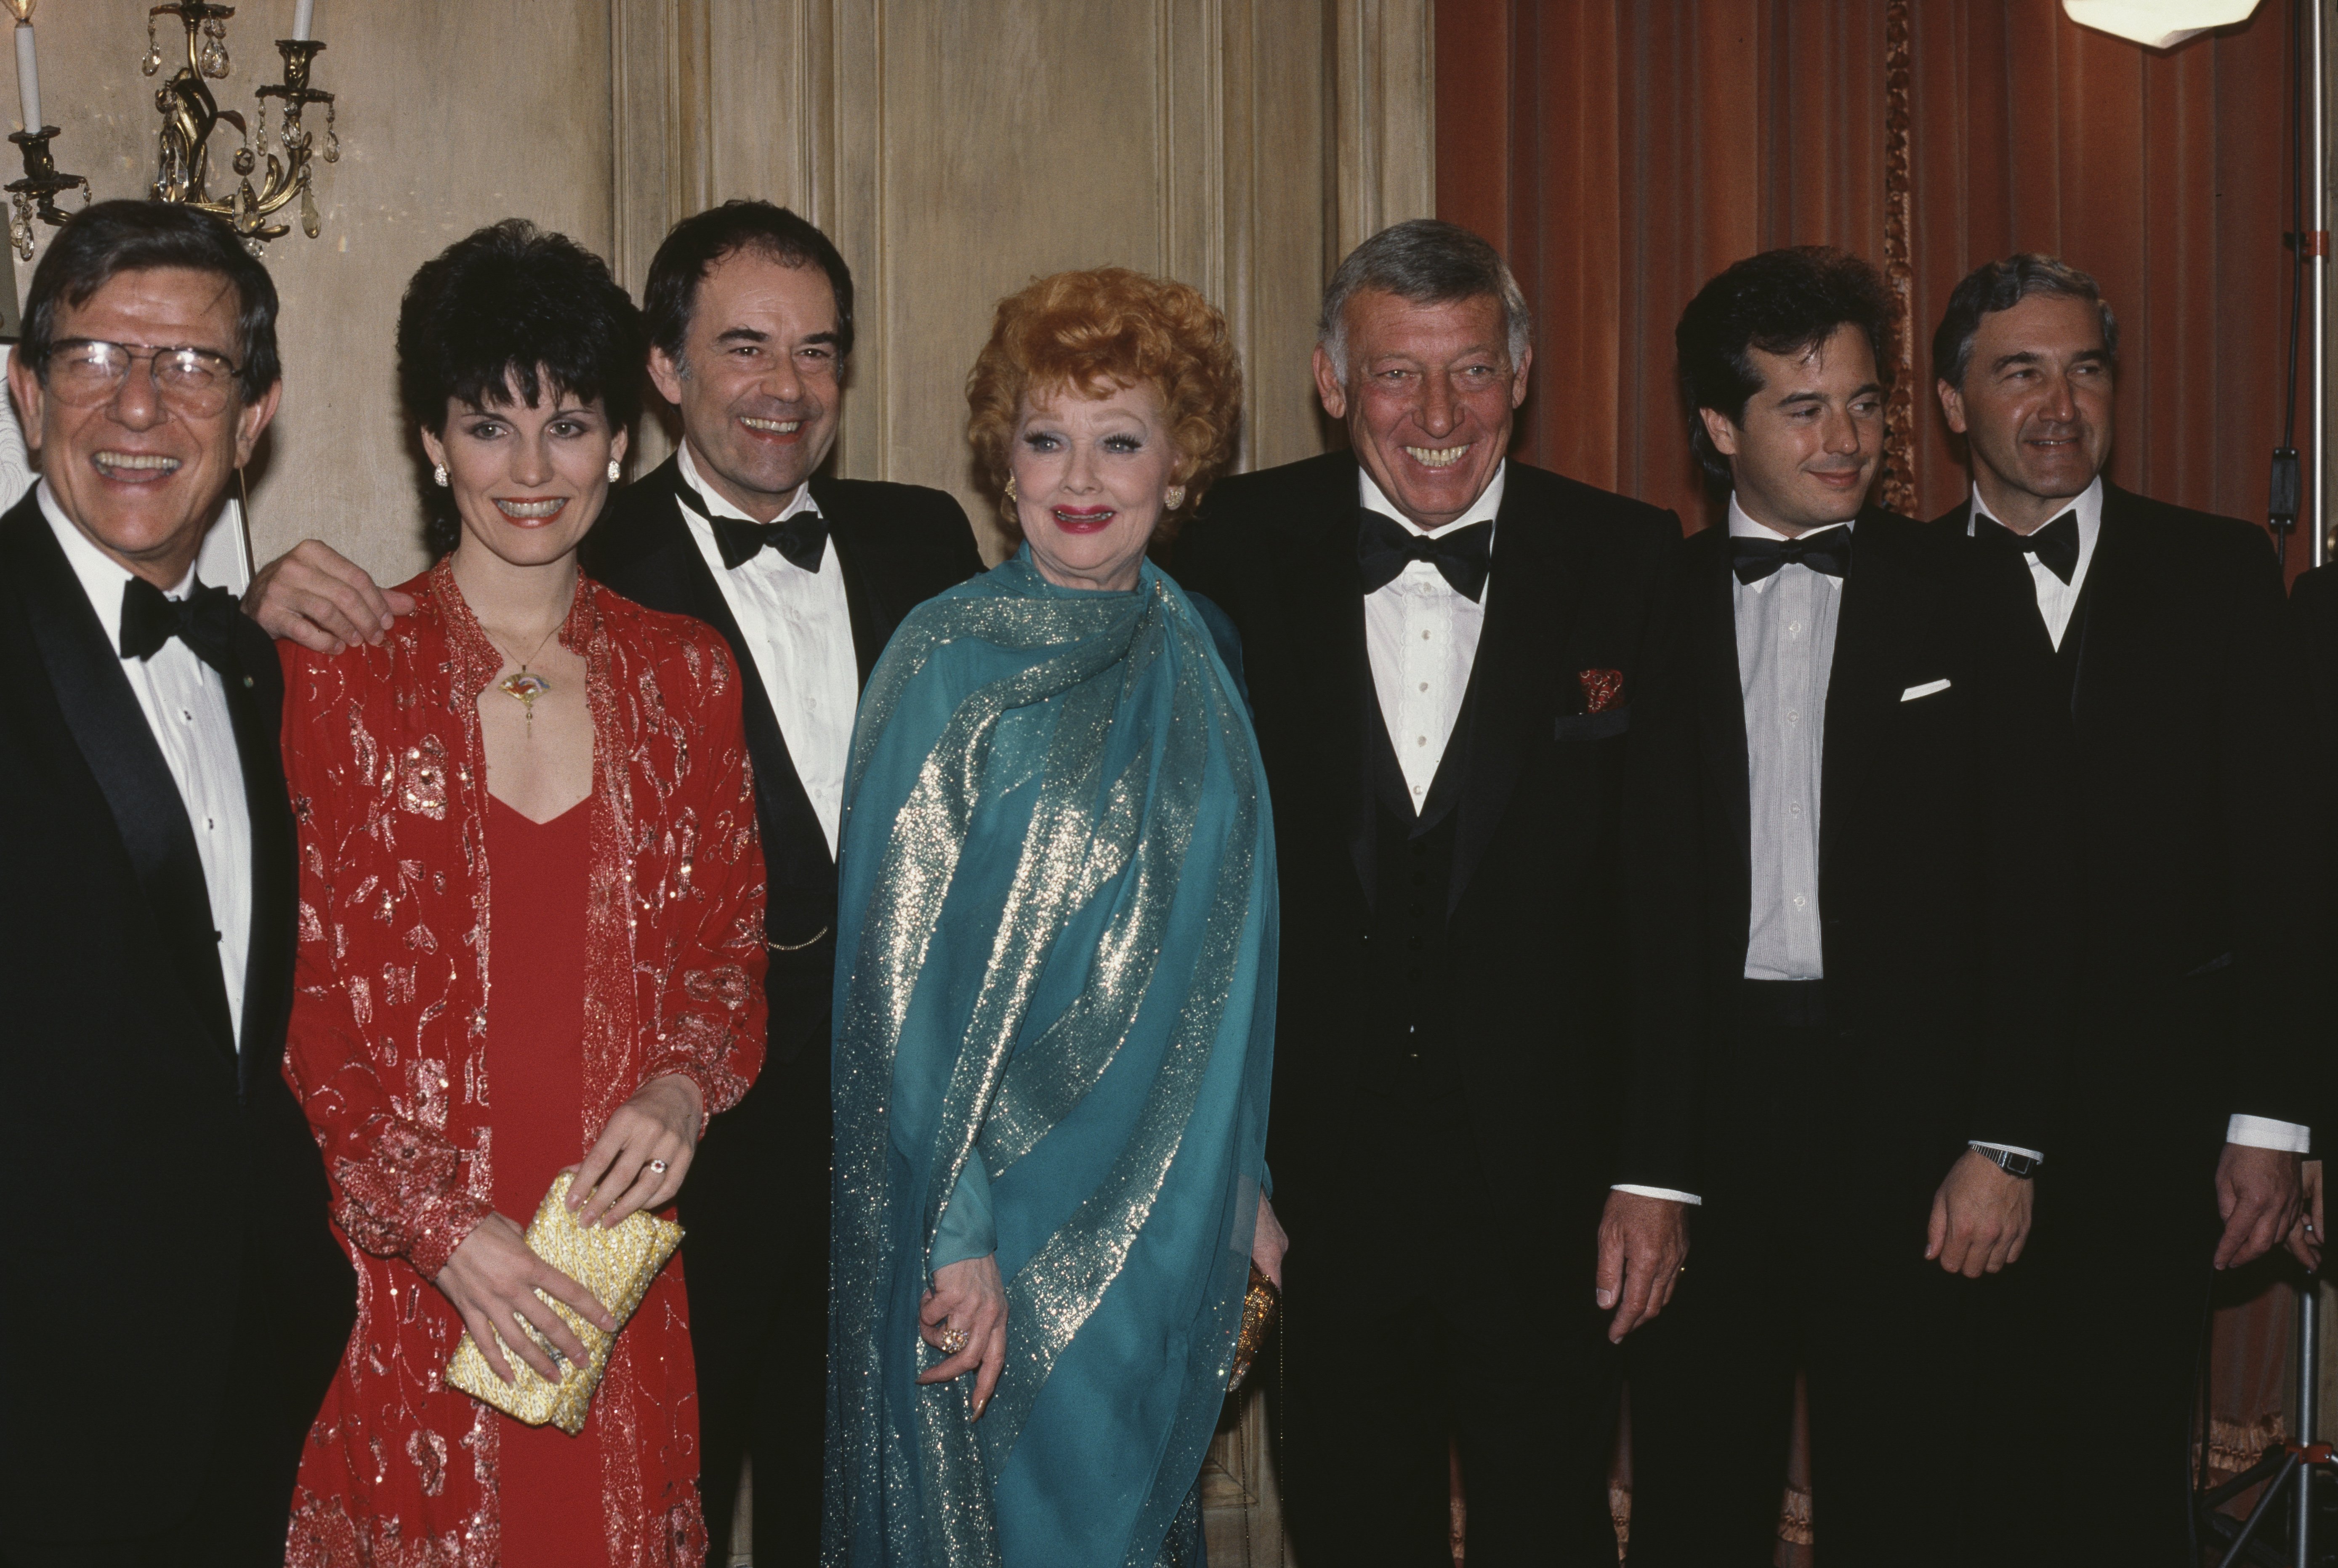 American actress and comedian Lucille Ball (1911 - 1989) with her family during a tribute to her by the Museum of Broadcasting in New York City, April 1984 | Source: Getty Images